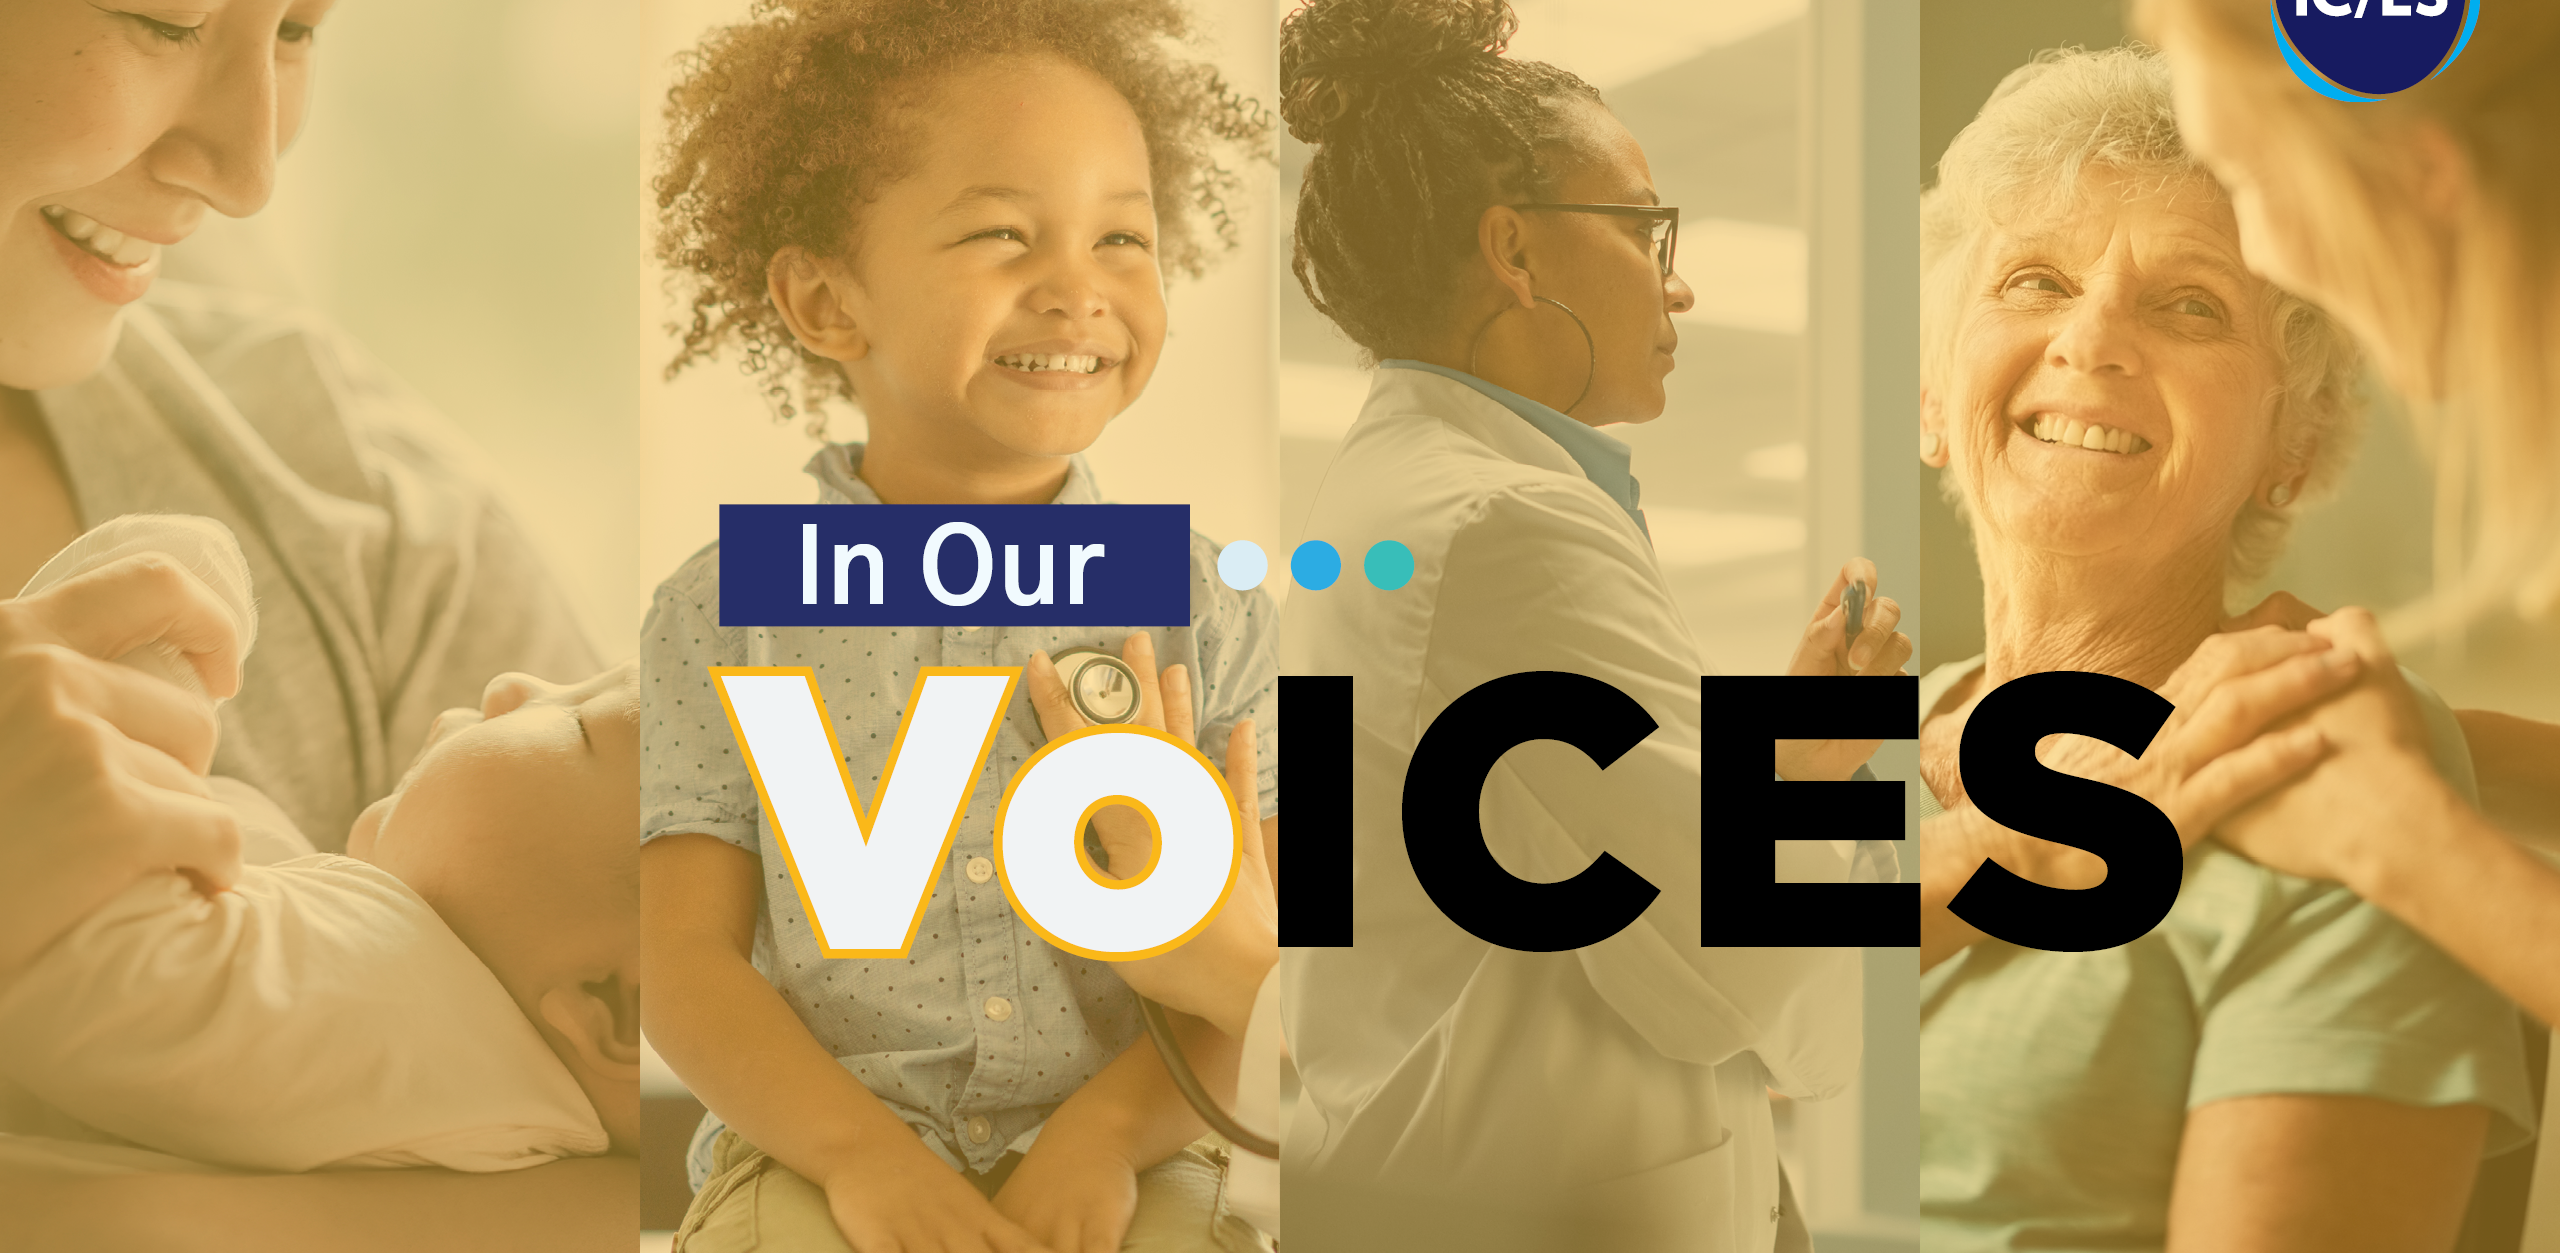 Image with 4 panels: mom and baby, young boy smiling widely, healthcare provider walking down hallway and daughter embracing her mother. Overlayed with the text "In Our Voices